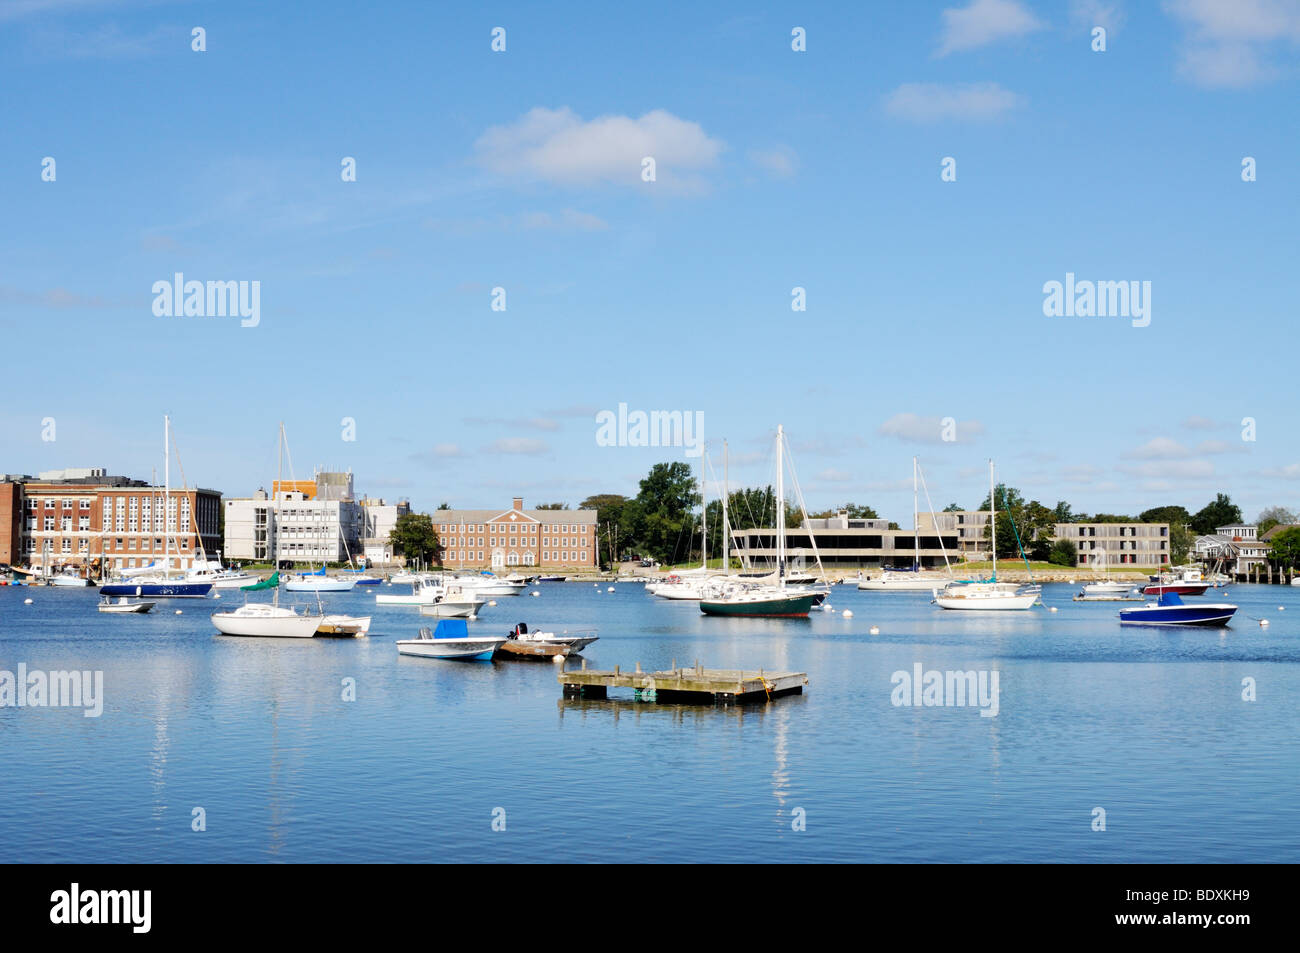 Malerische Aal Teich in Woods Hole, Falmouth, Cape Cod Stockfoto